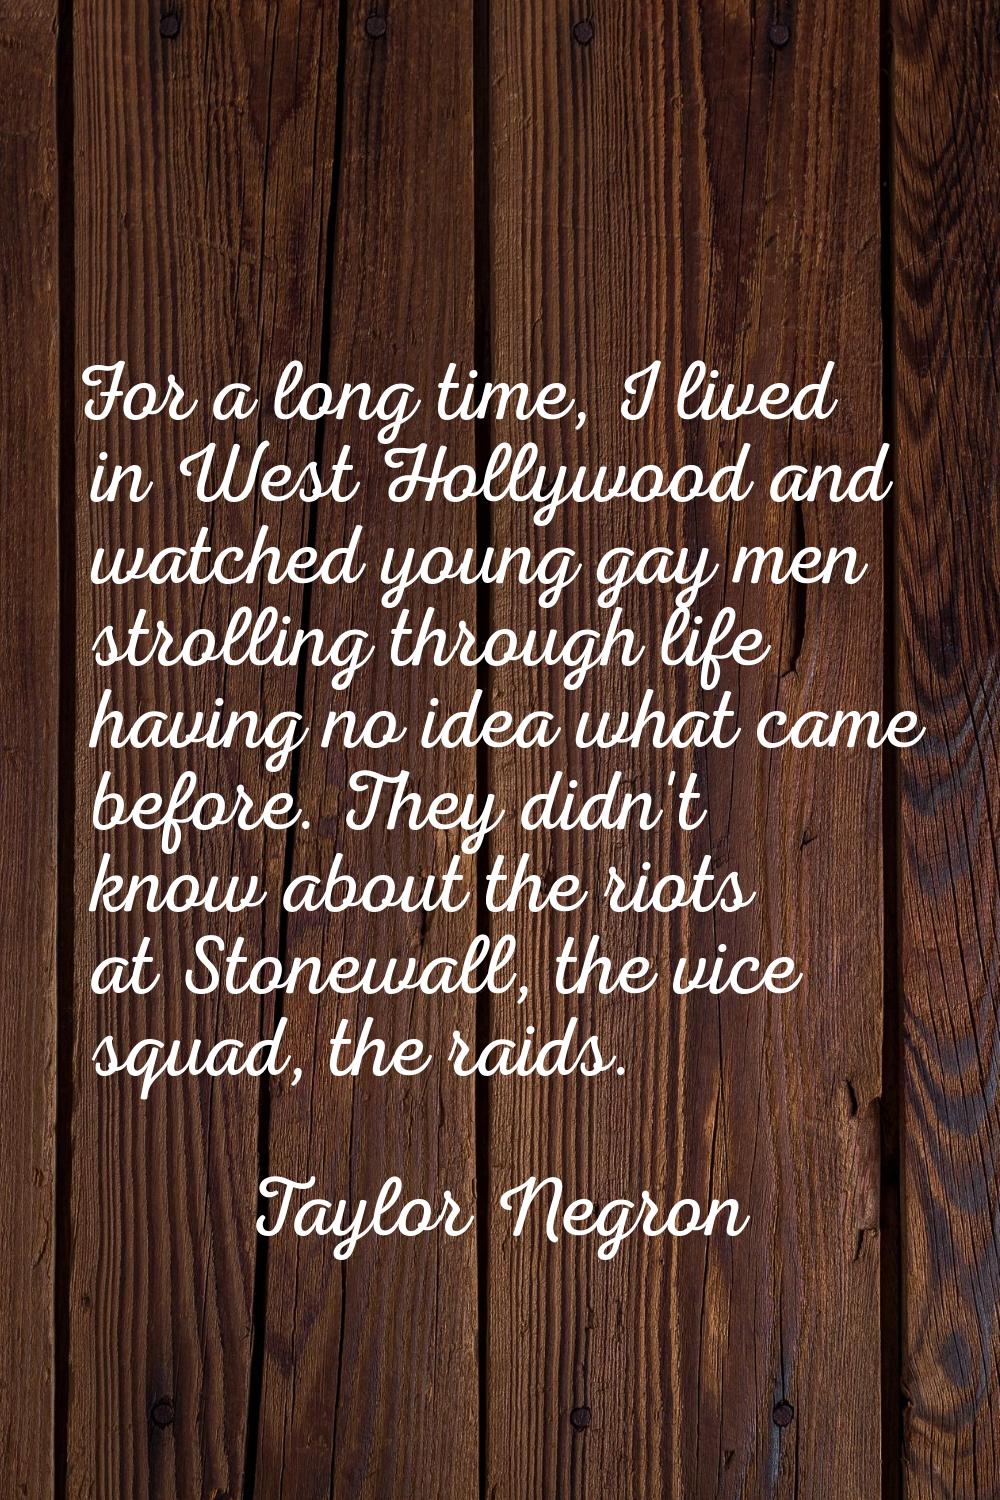 For a long time, I lived in West Hollywood and watched young gay men strolling through life having 